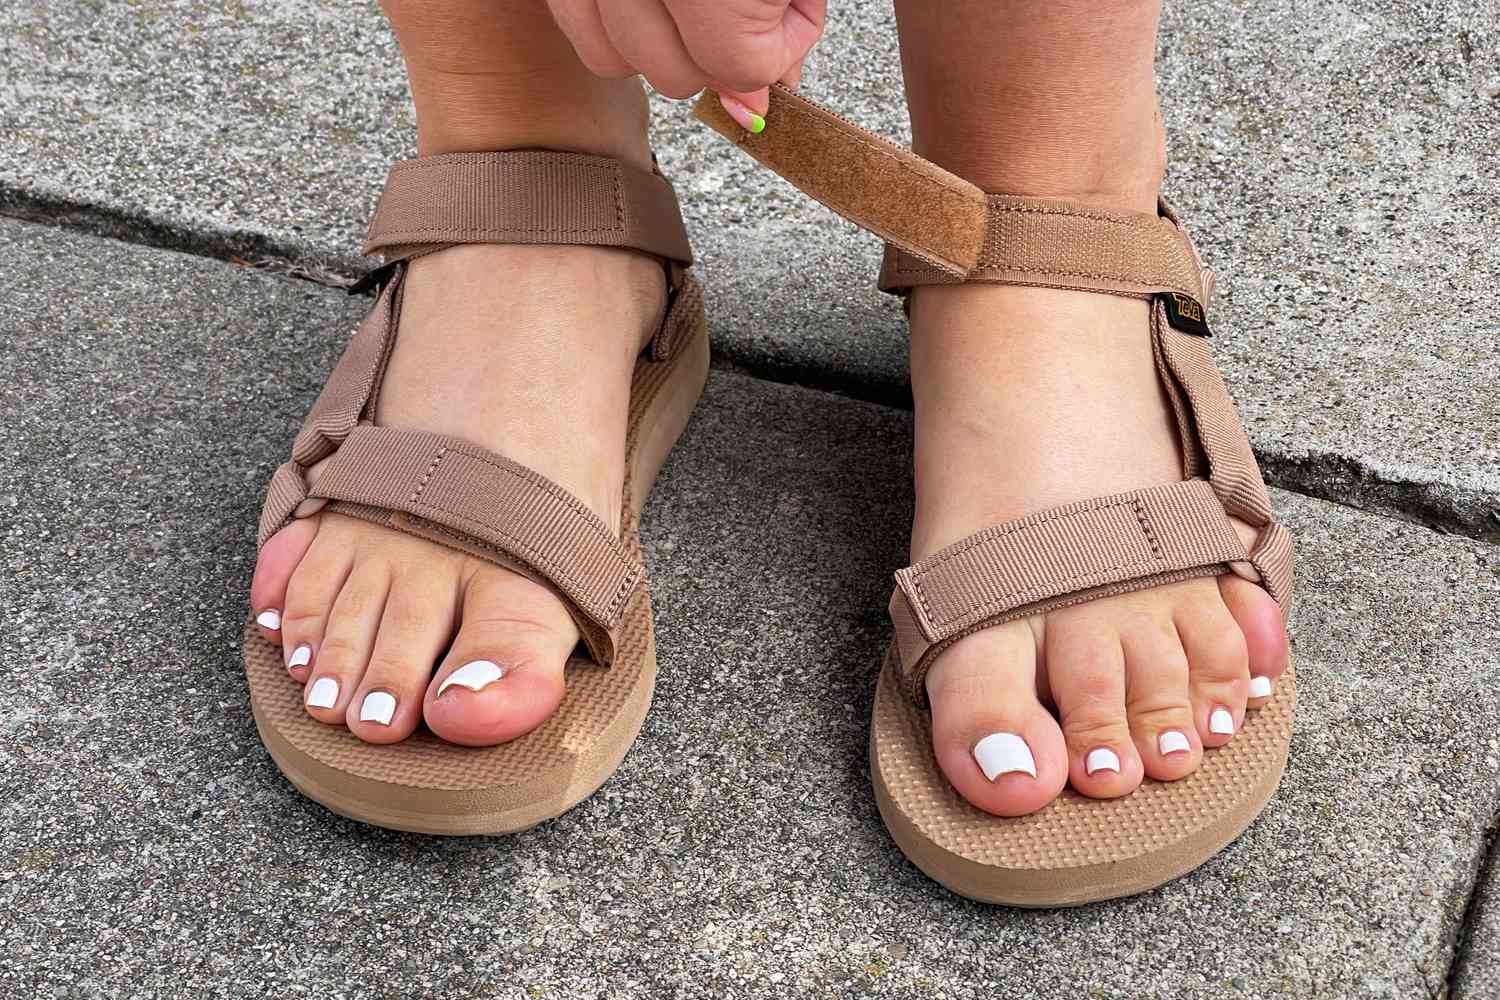 How Do You Fit Walking Sandals?